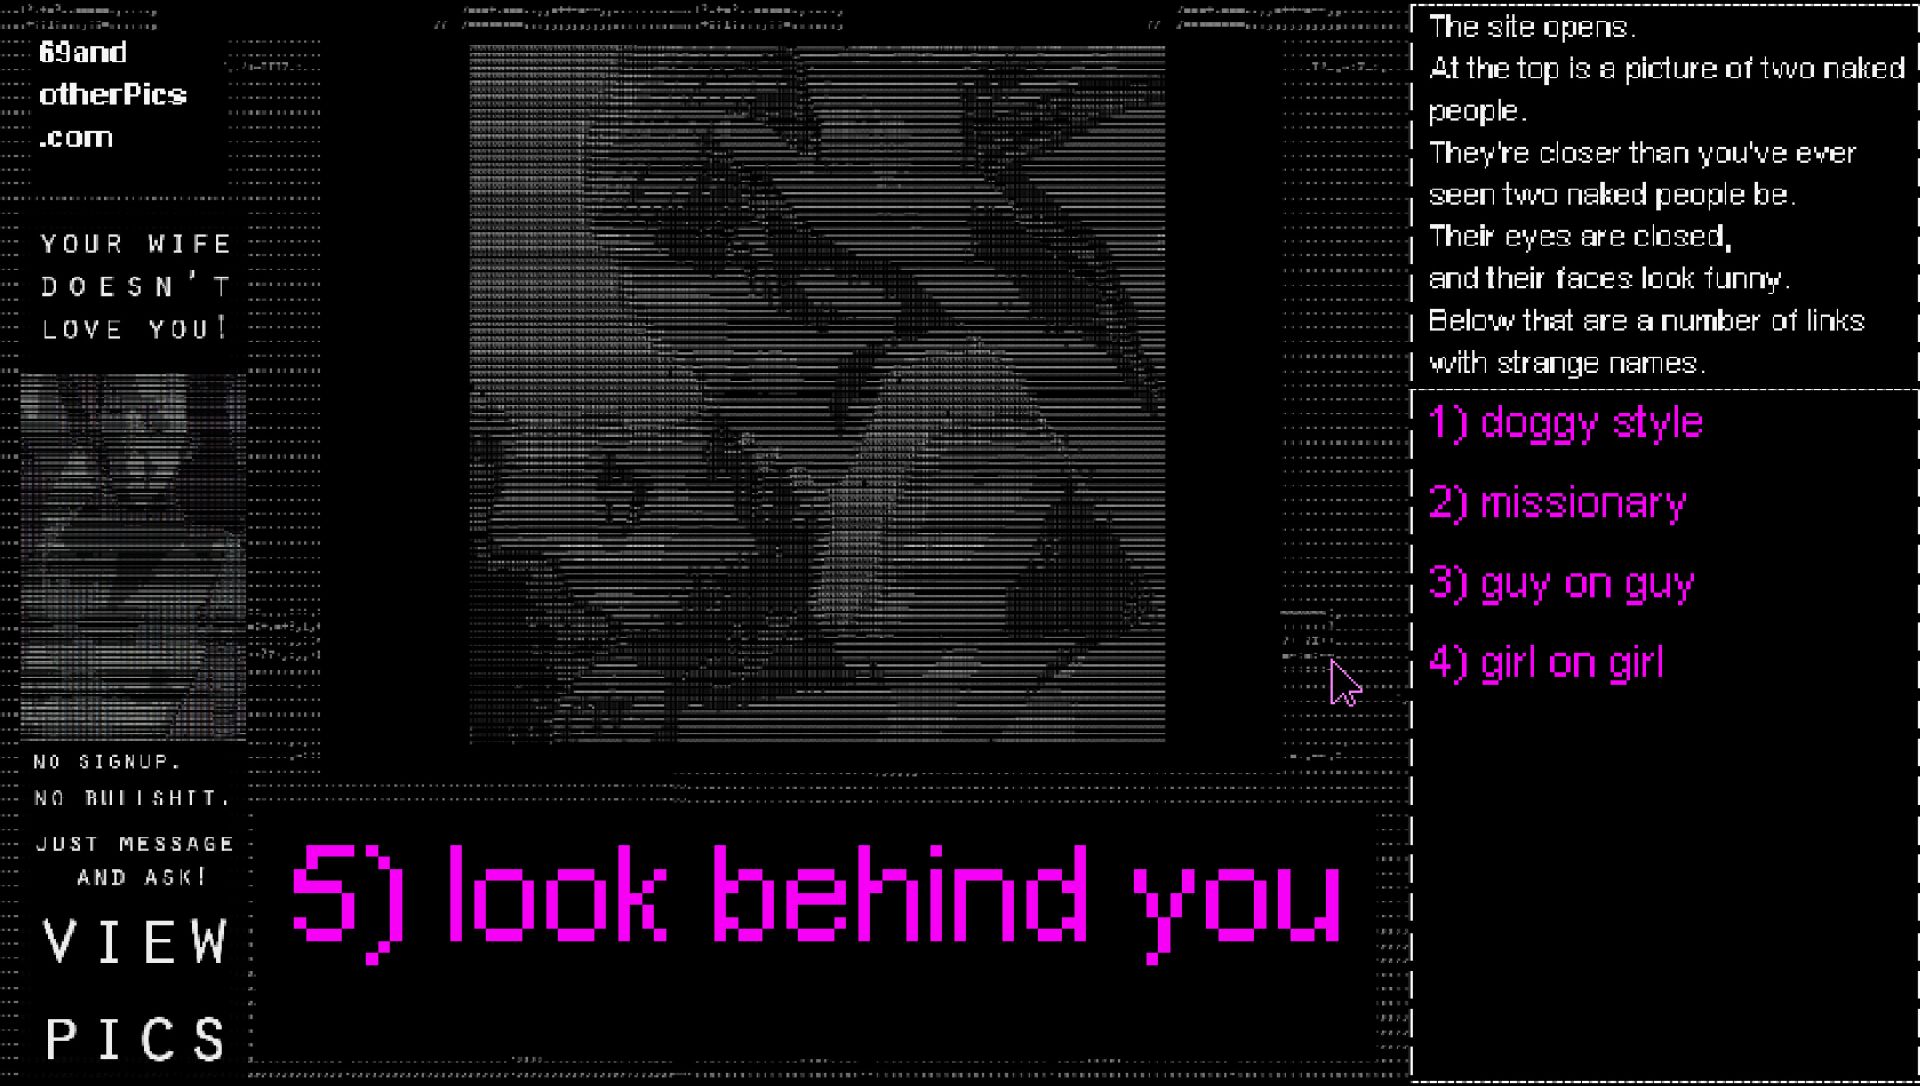 Best sex games - Suggestive ASCII art in You Must Be 18 or Older to Enter